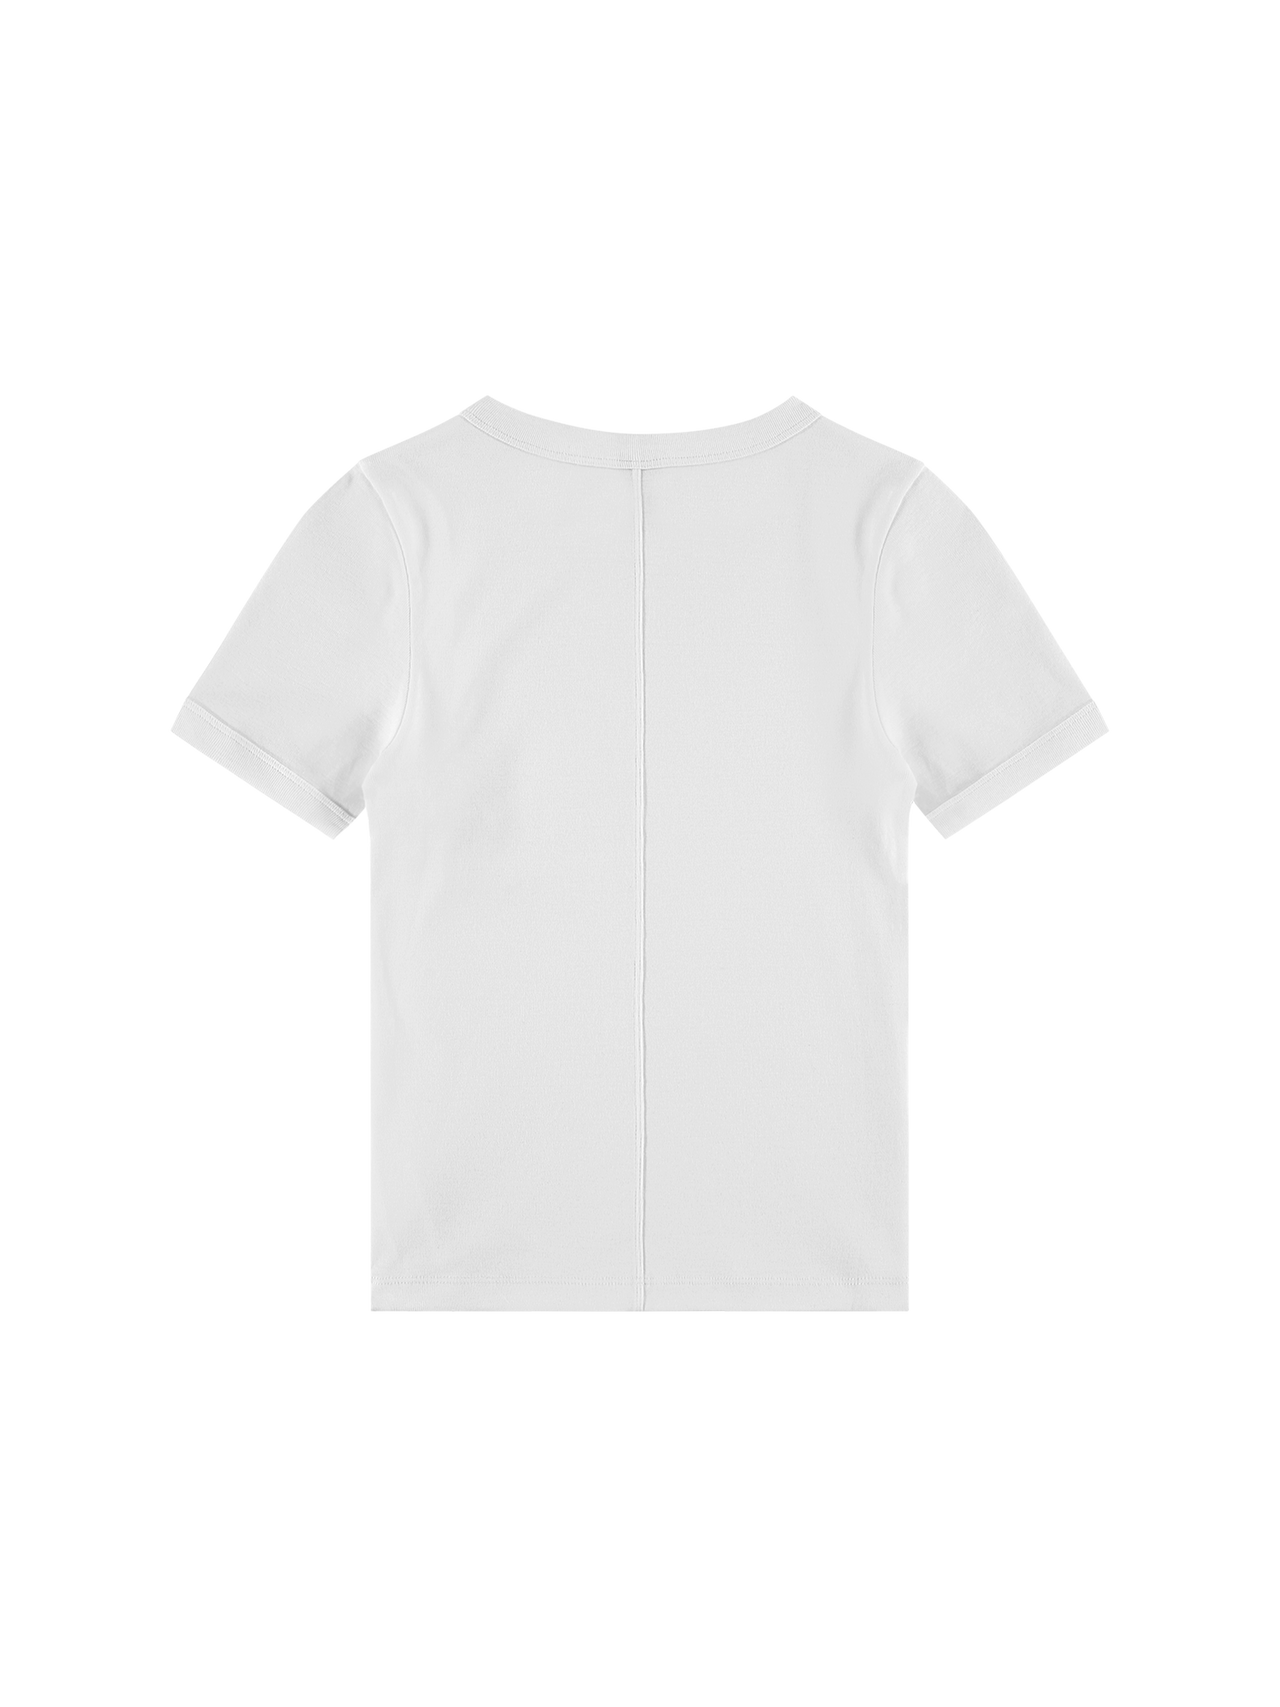 CAR TEE BY FLORE FLORE